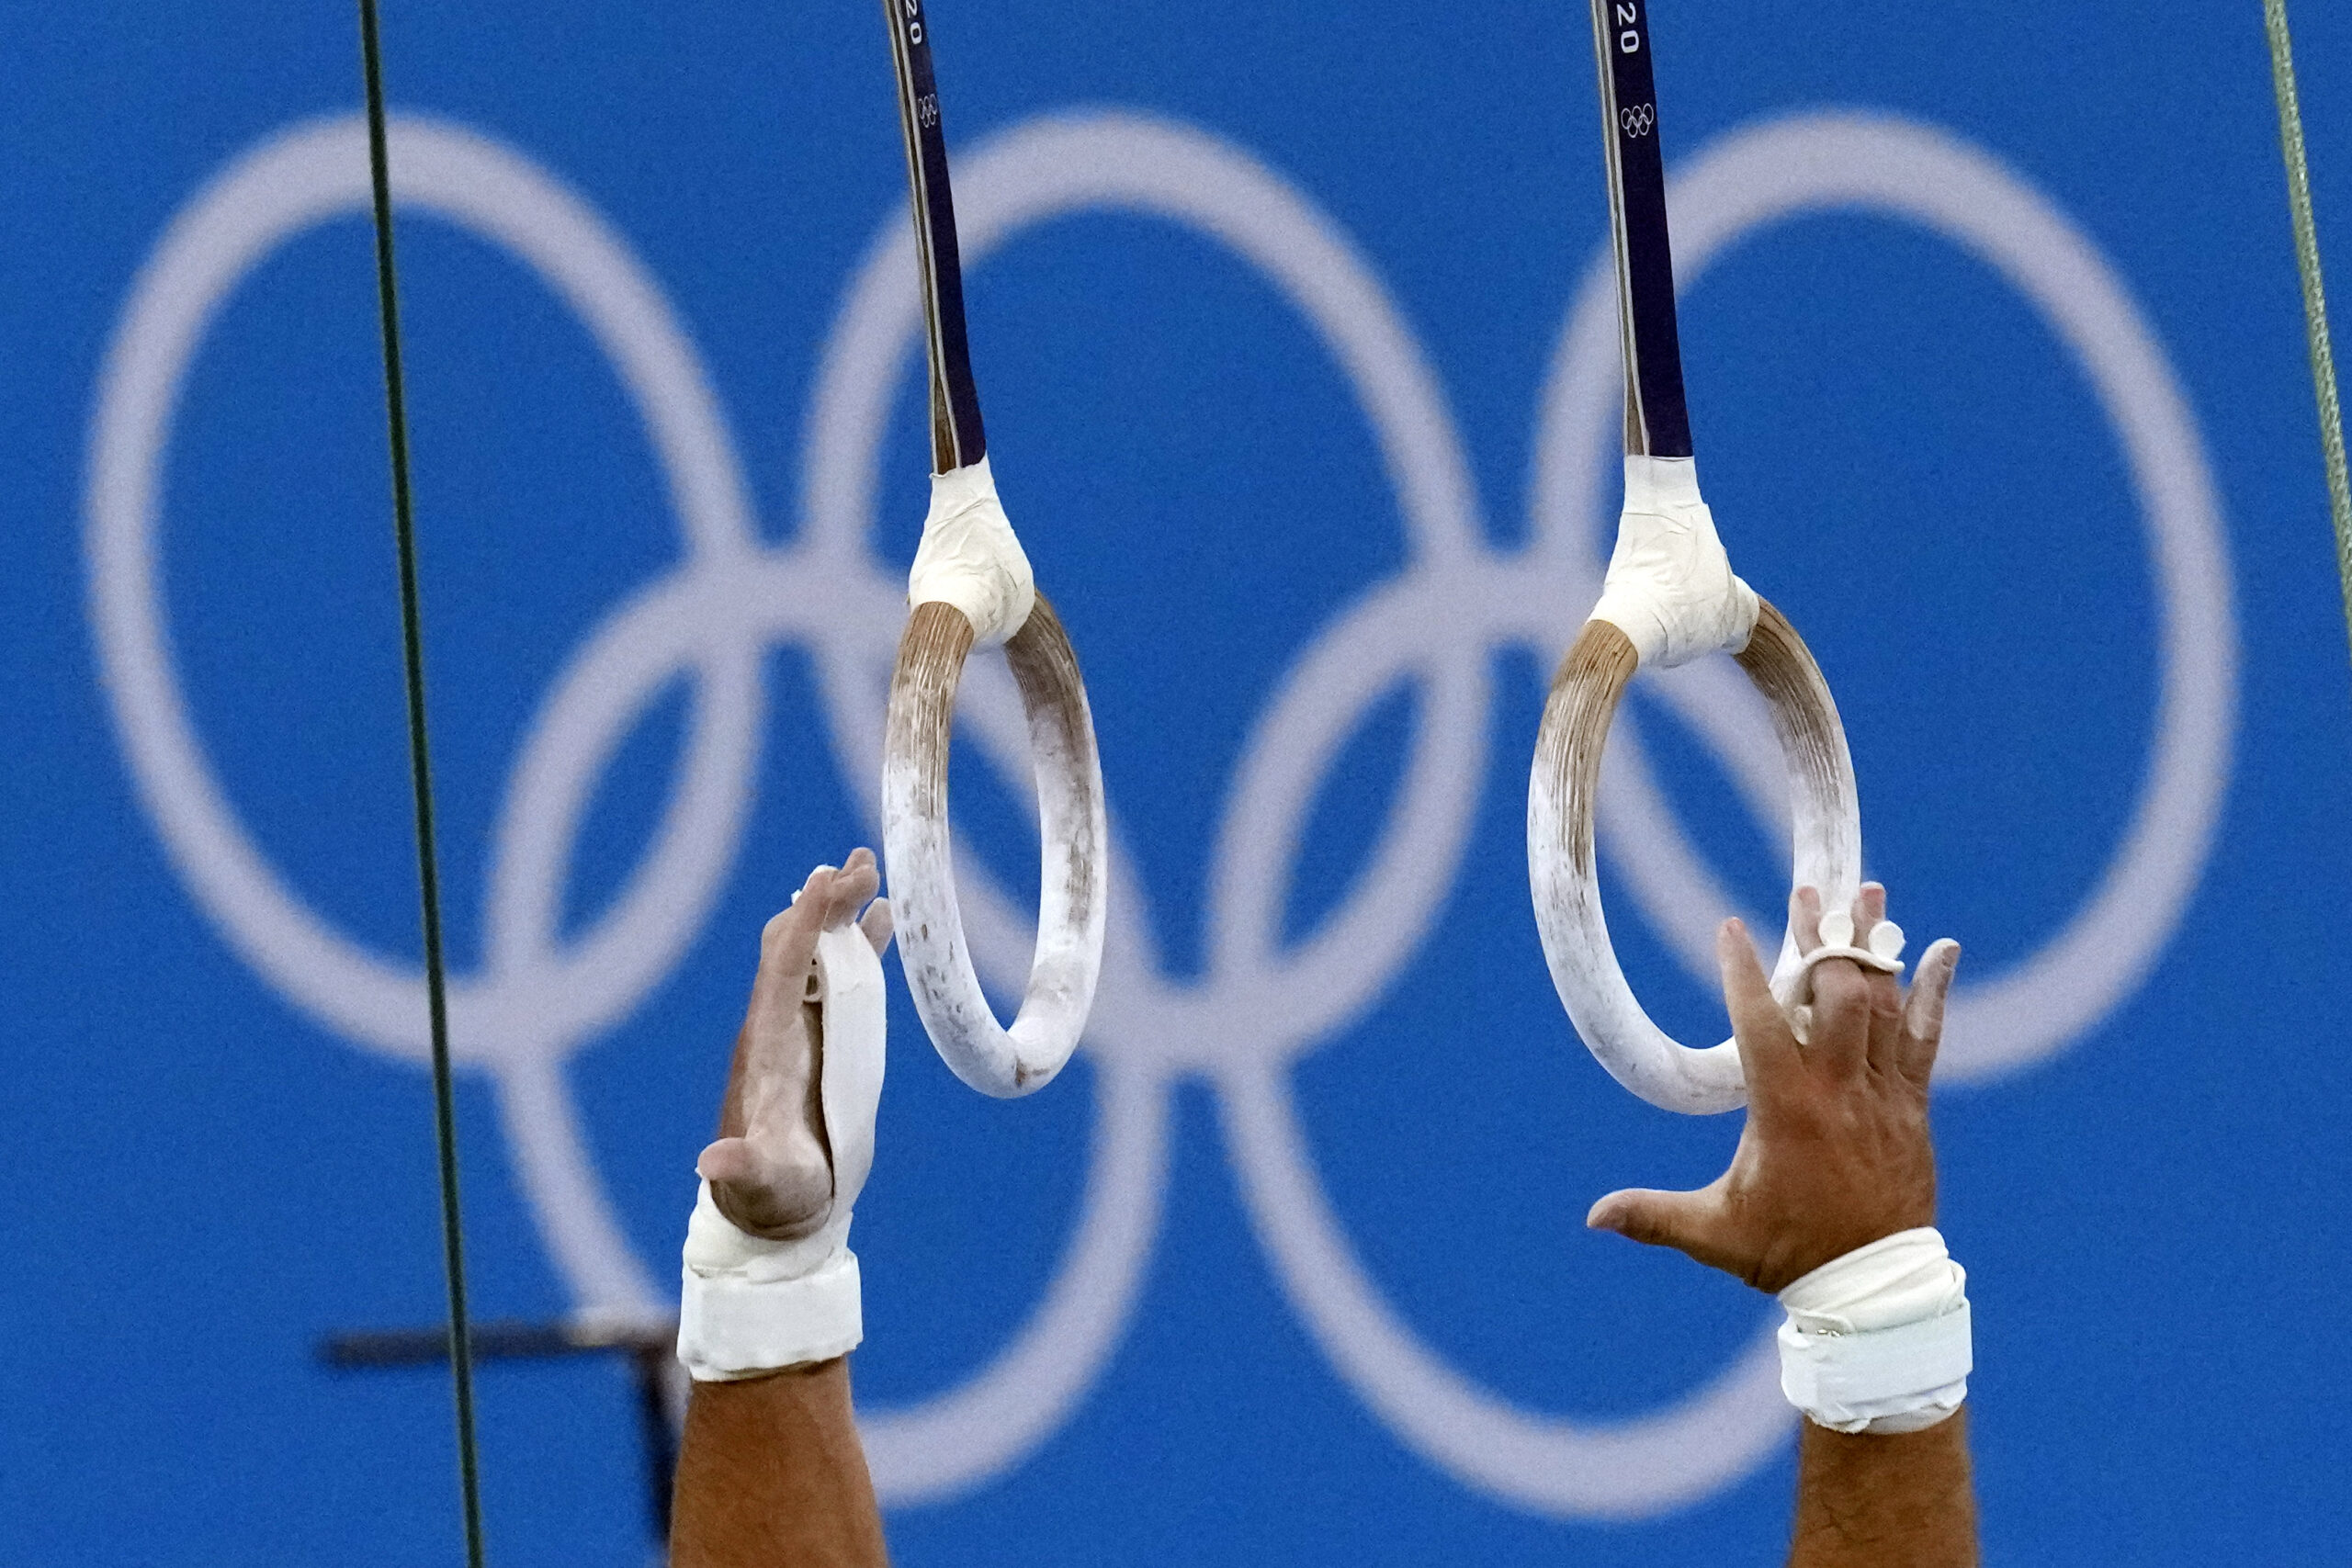 Samir Ait Said, of France, reaches for the rings during competition in artistic gymnastics at the 2020 Summer Olympics